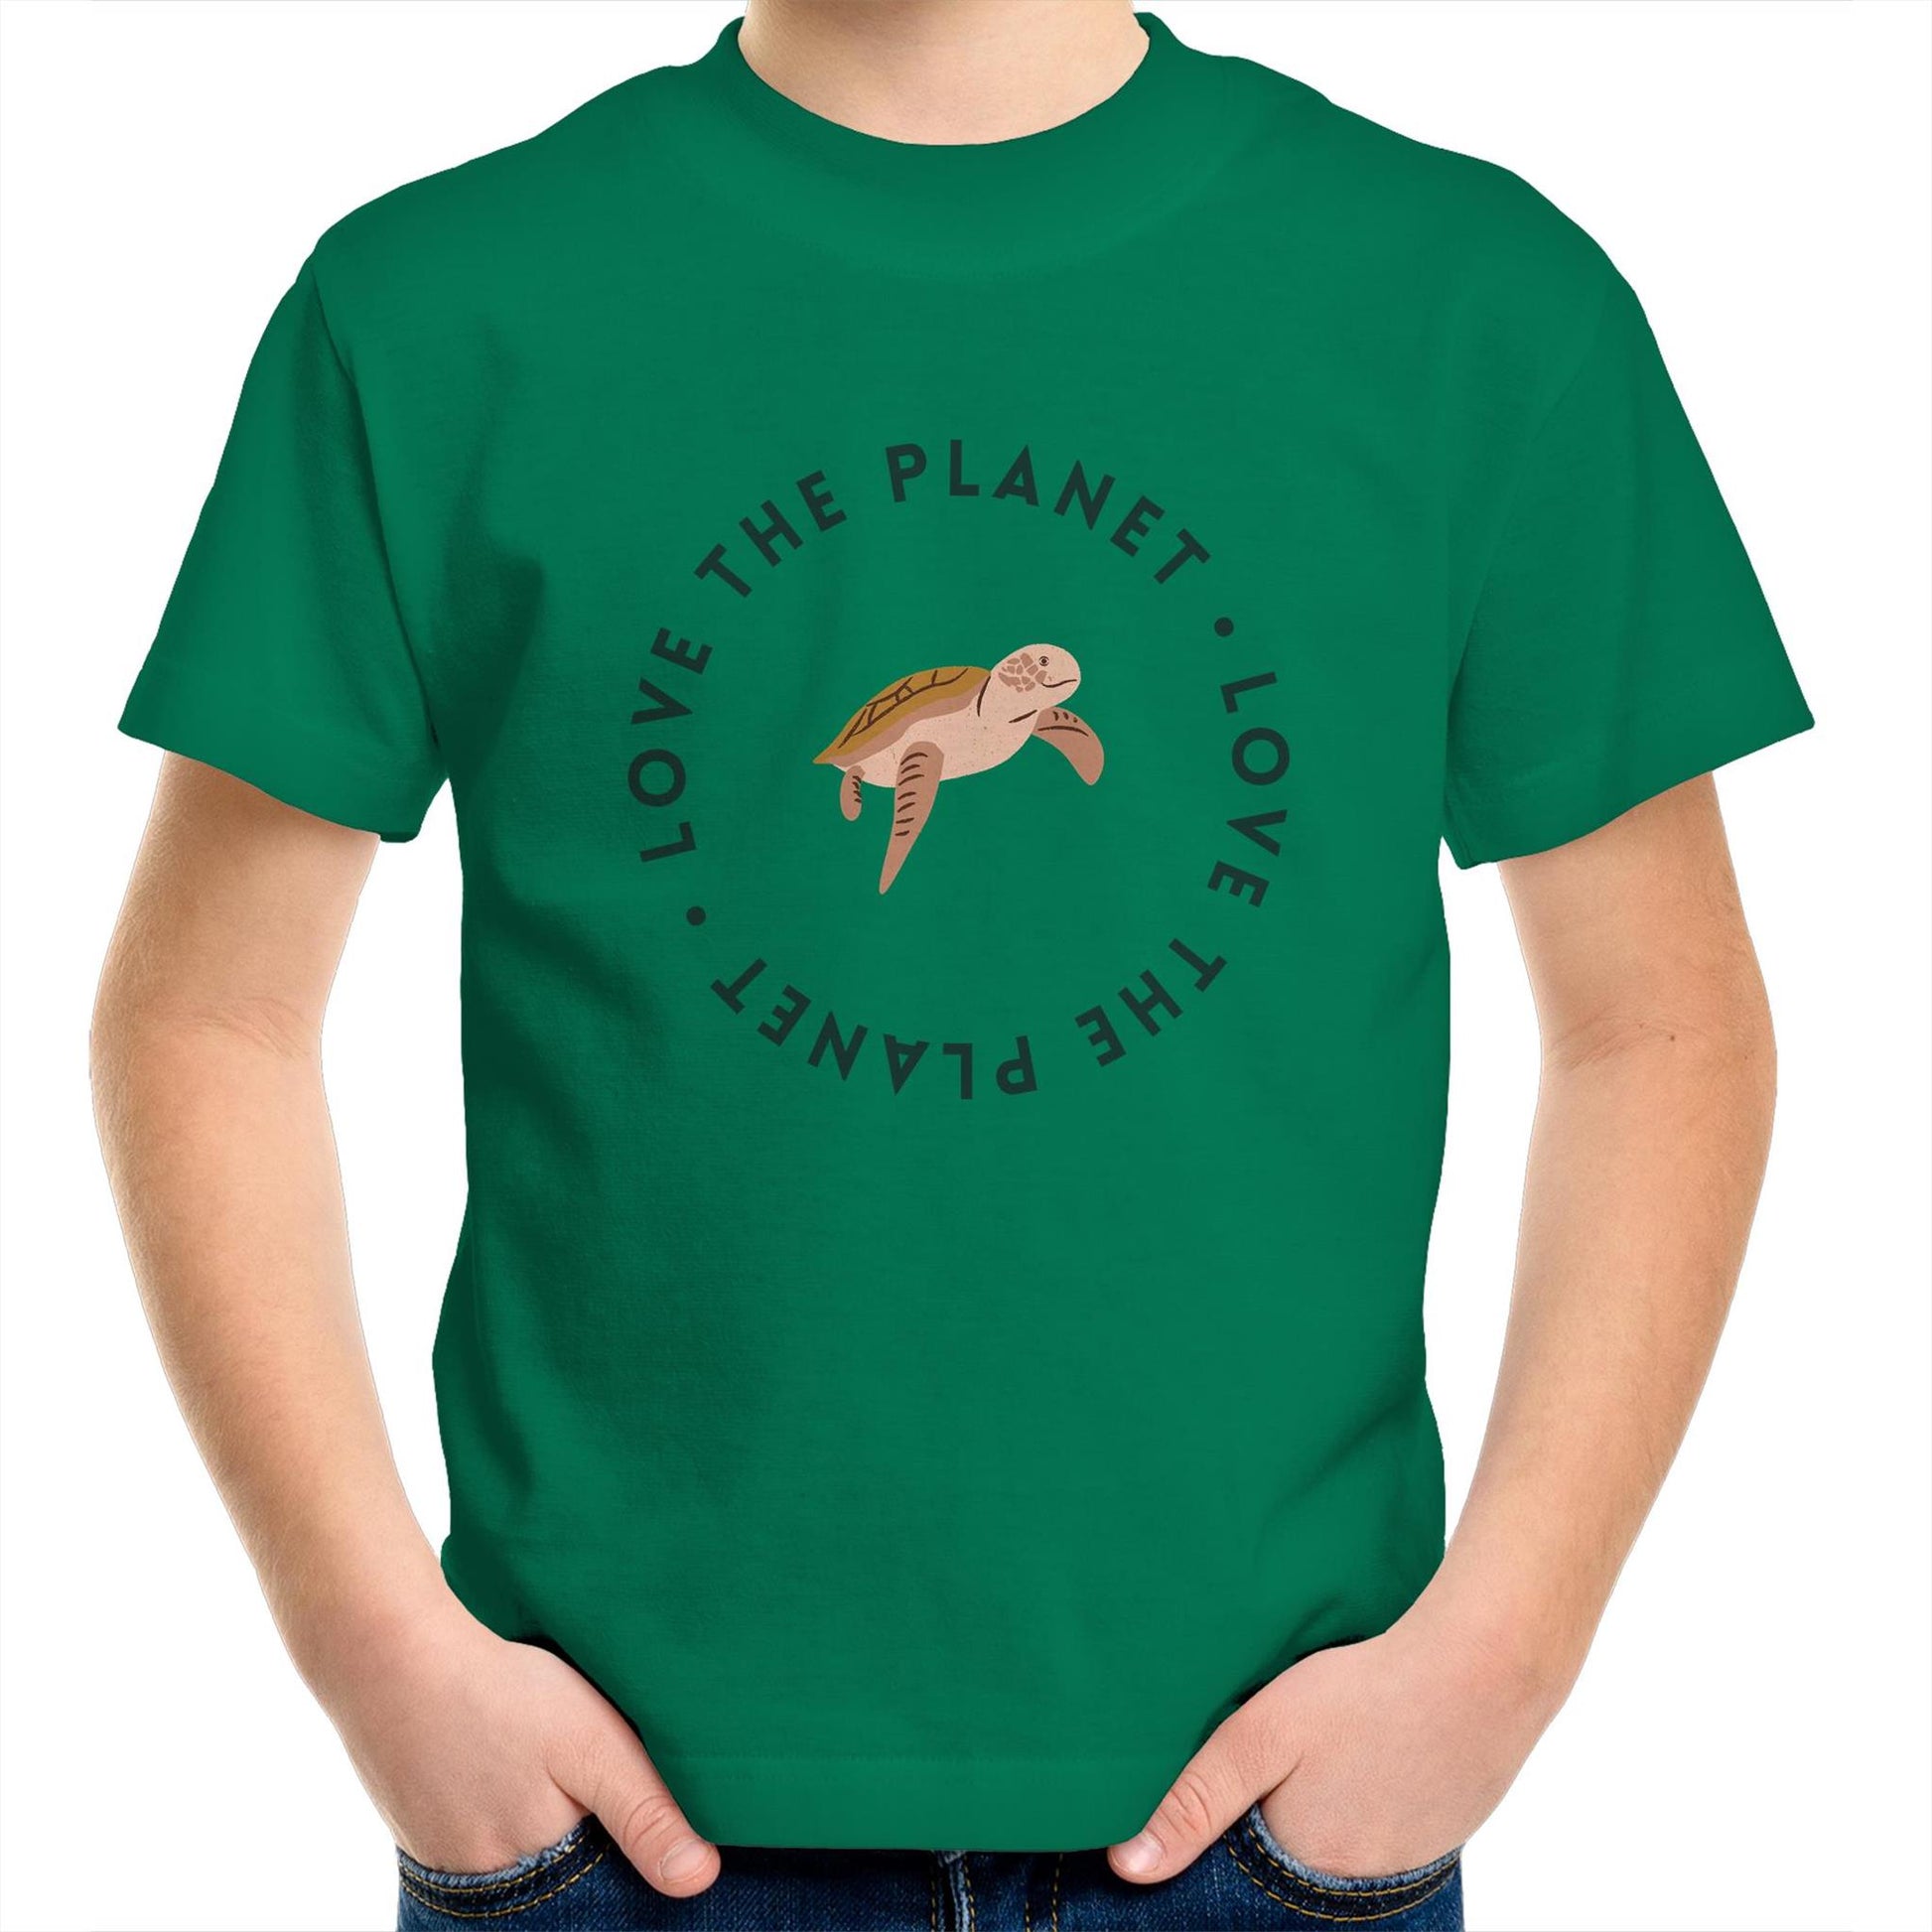 Love The Planet - Kids Youth Crew T-Shirt Kelly Green Kids Youth T-shirt animal Environment